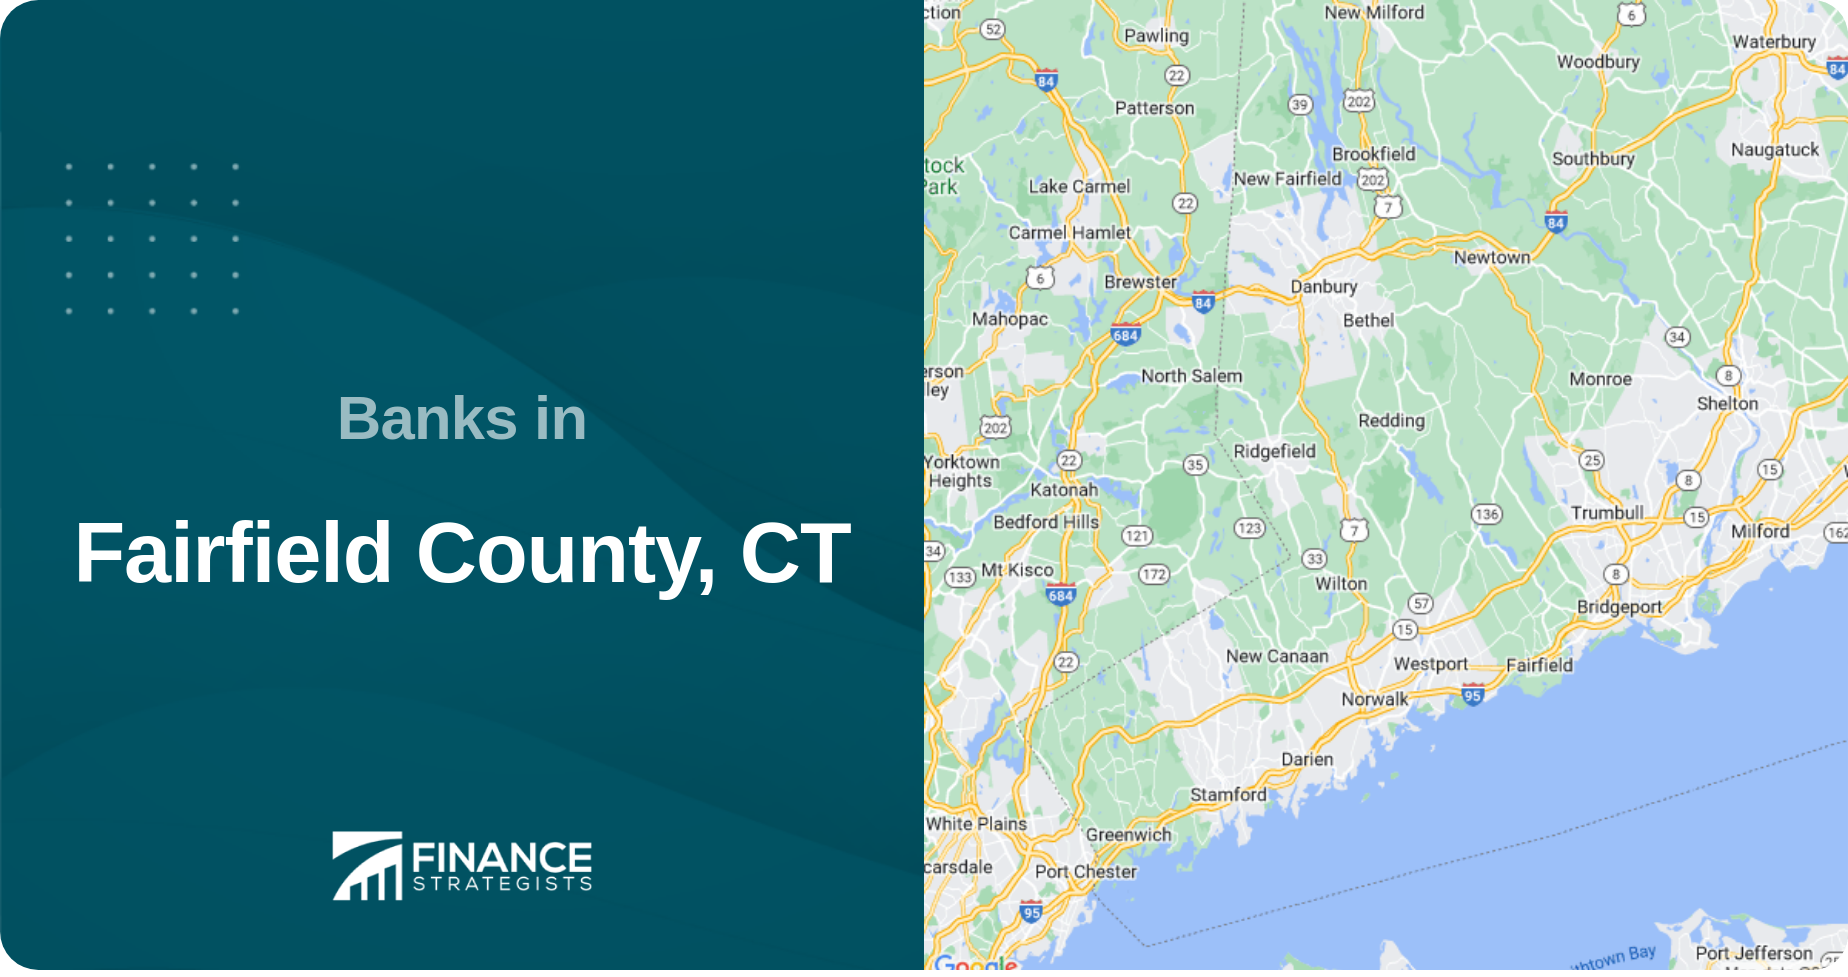 Banks in Fairfield County, CT